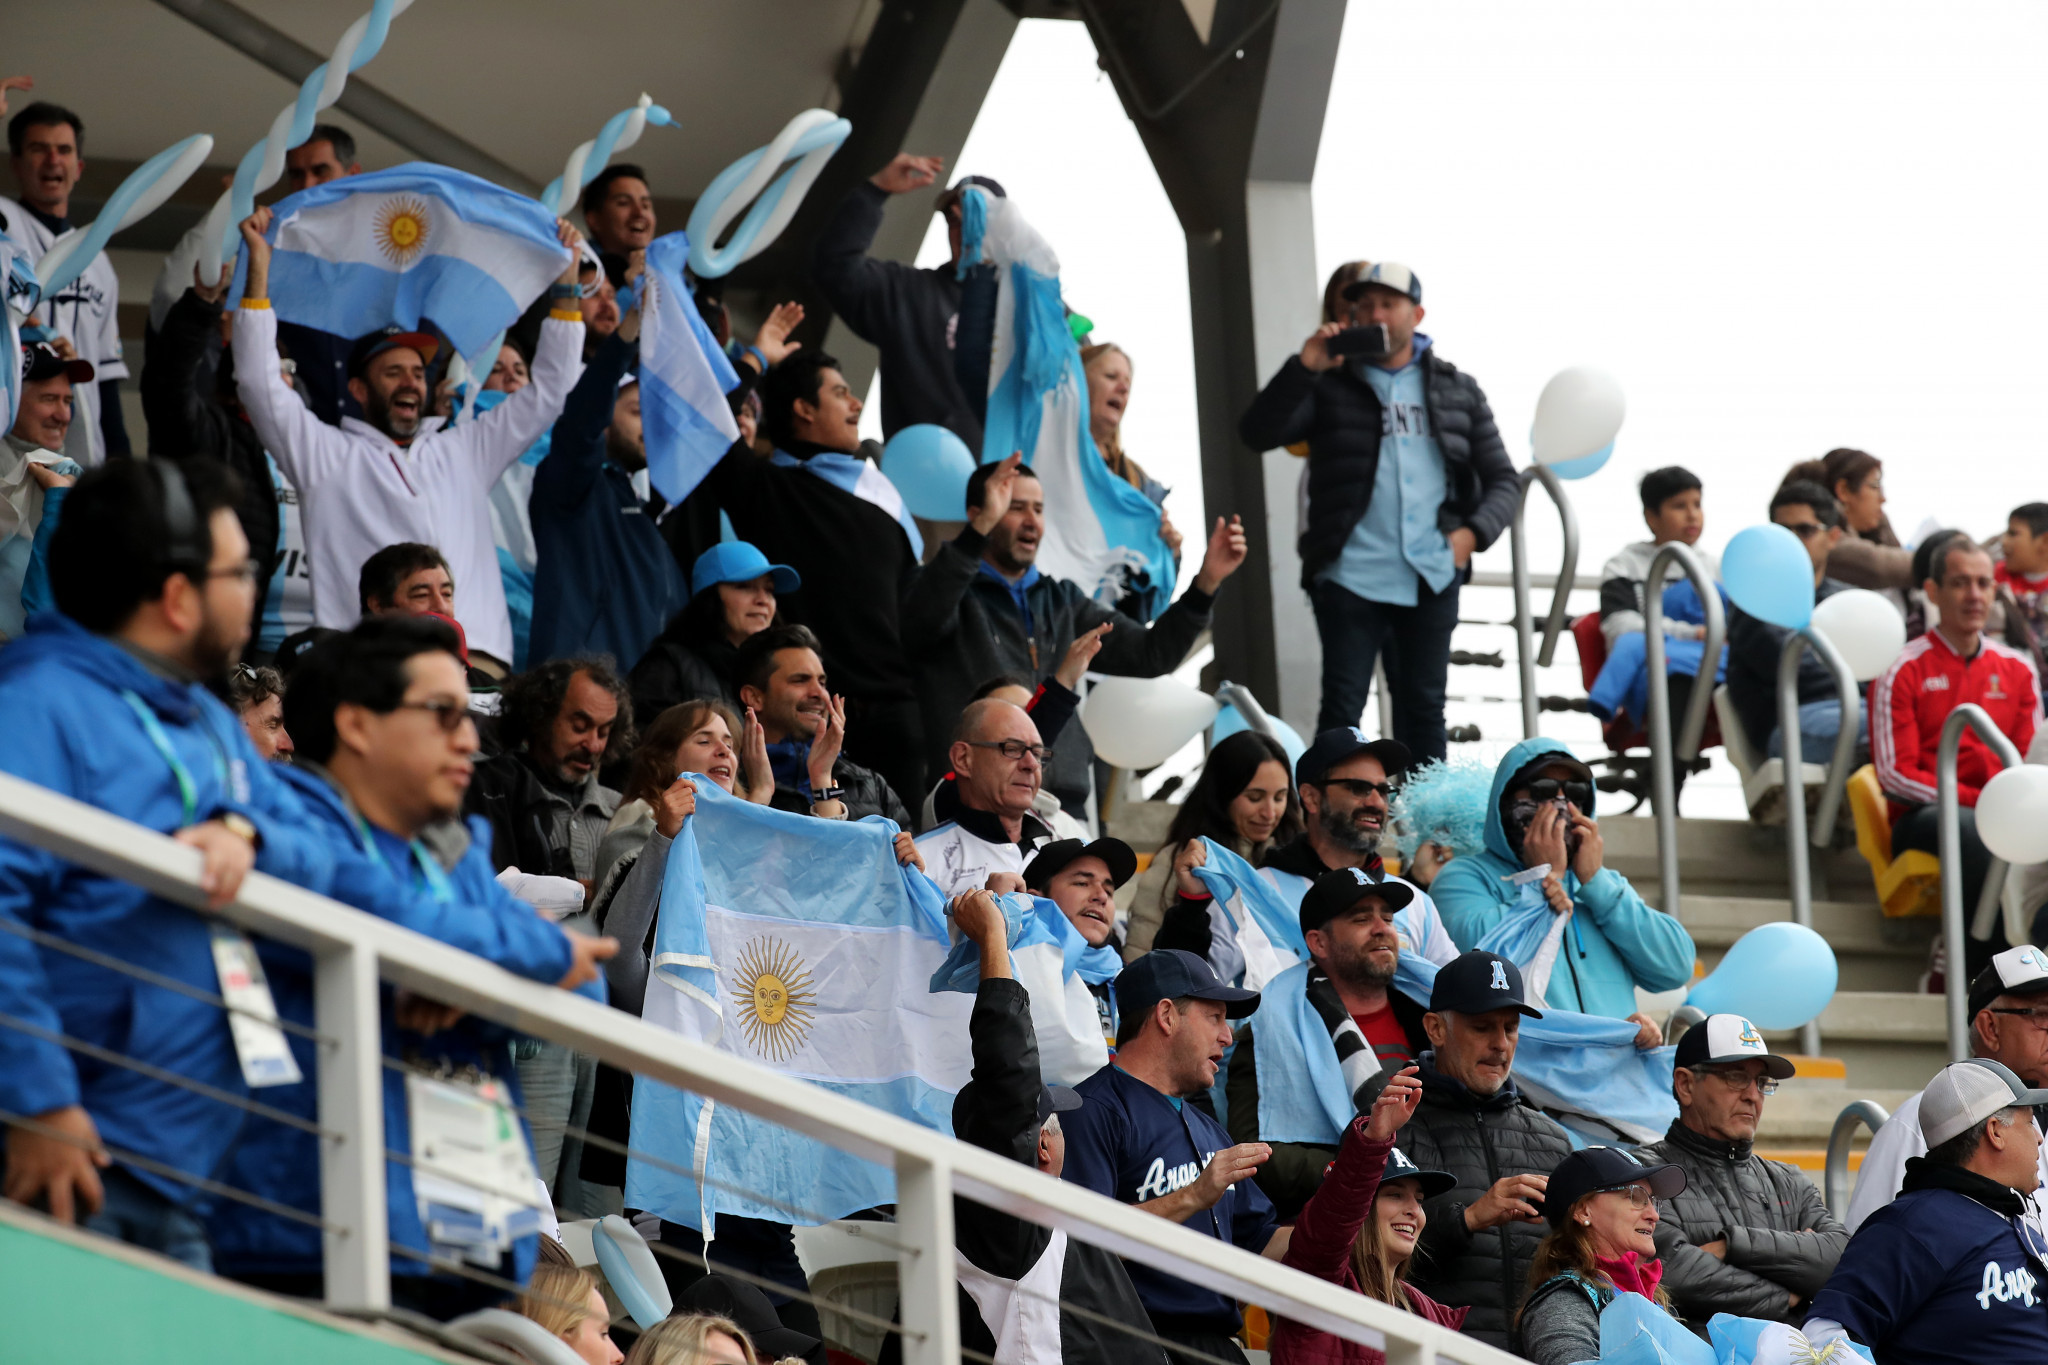 Argentina were well supported in the gold medal match ©Getty Images